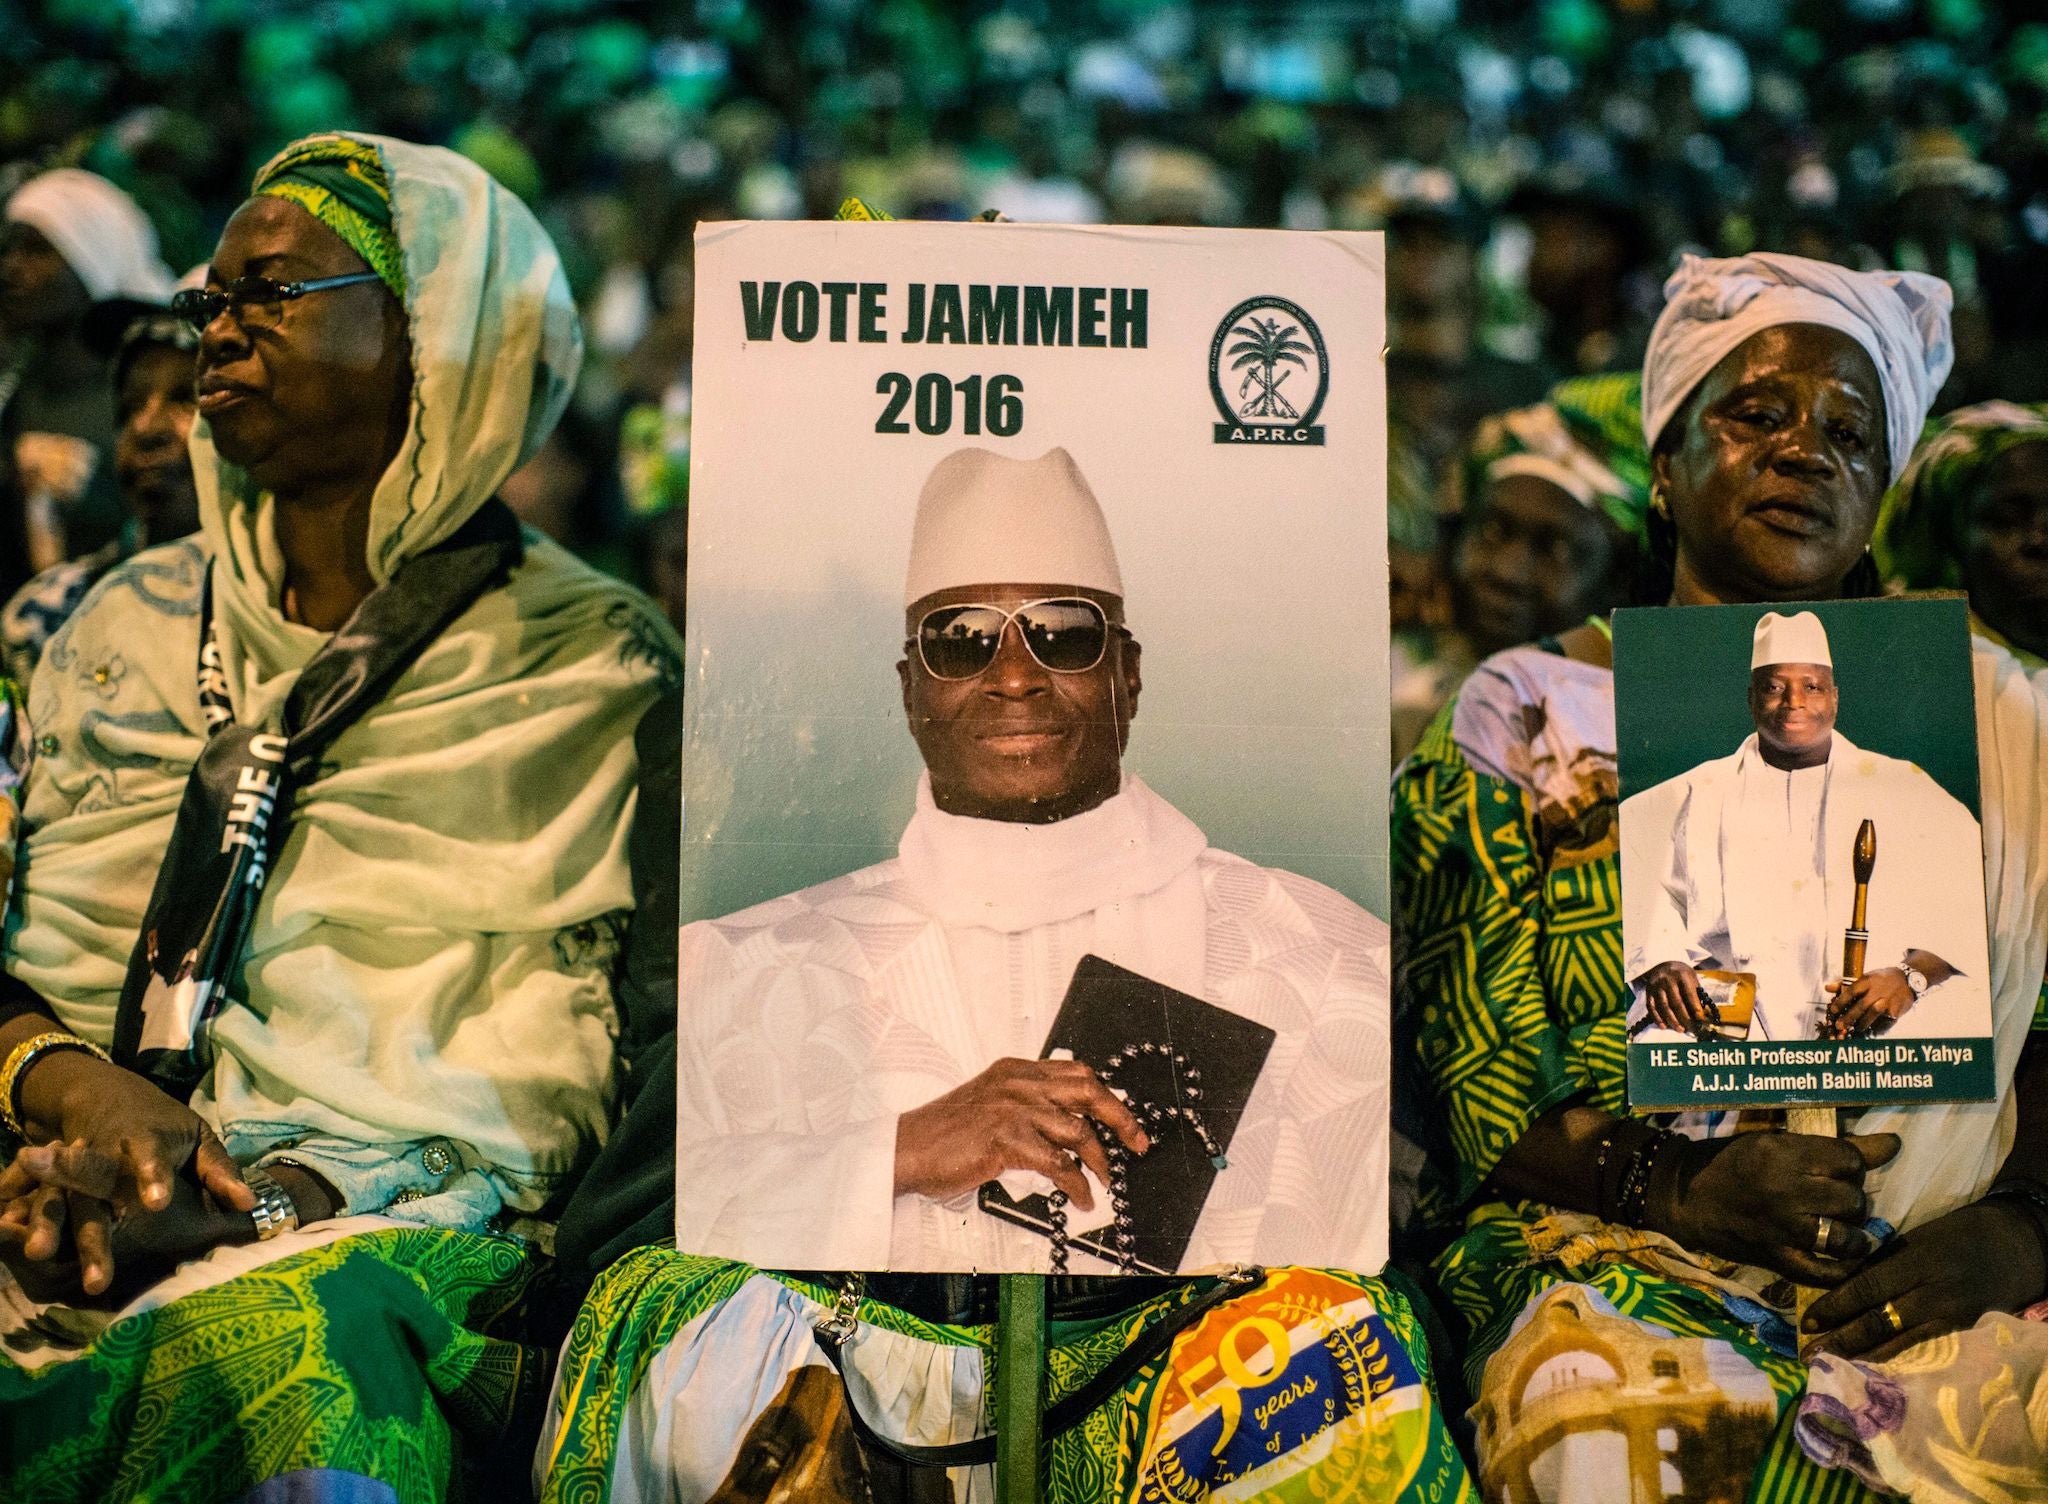 Supporters of incumbent President Yahya Jammeh sit at a campaign rally on 29 November 2016